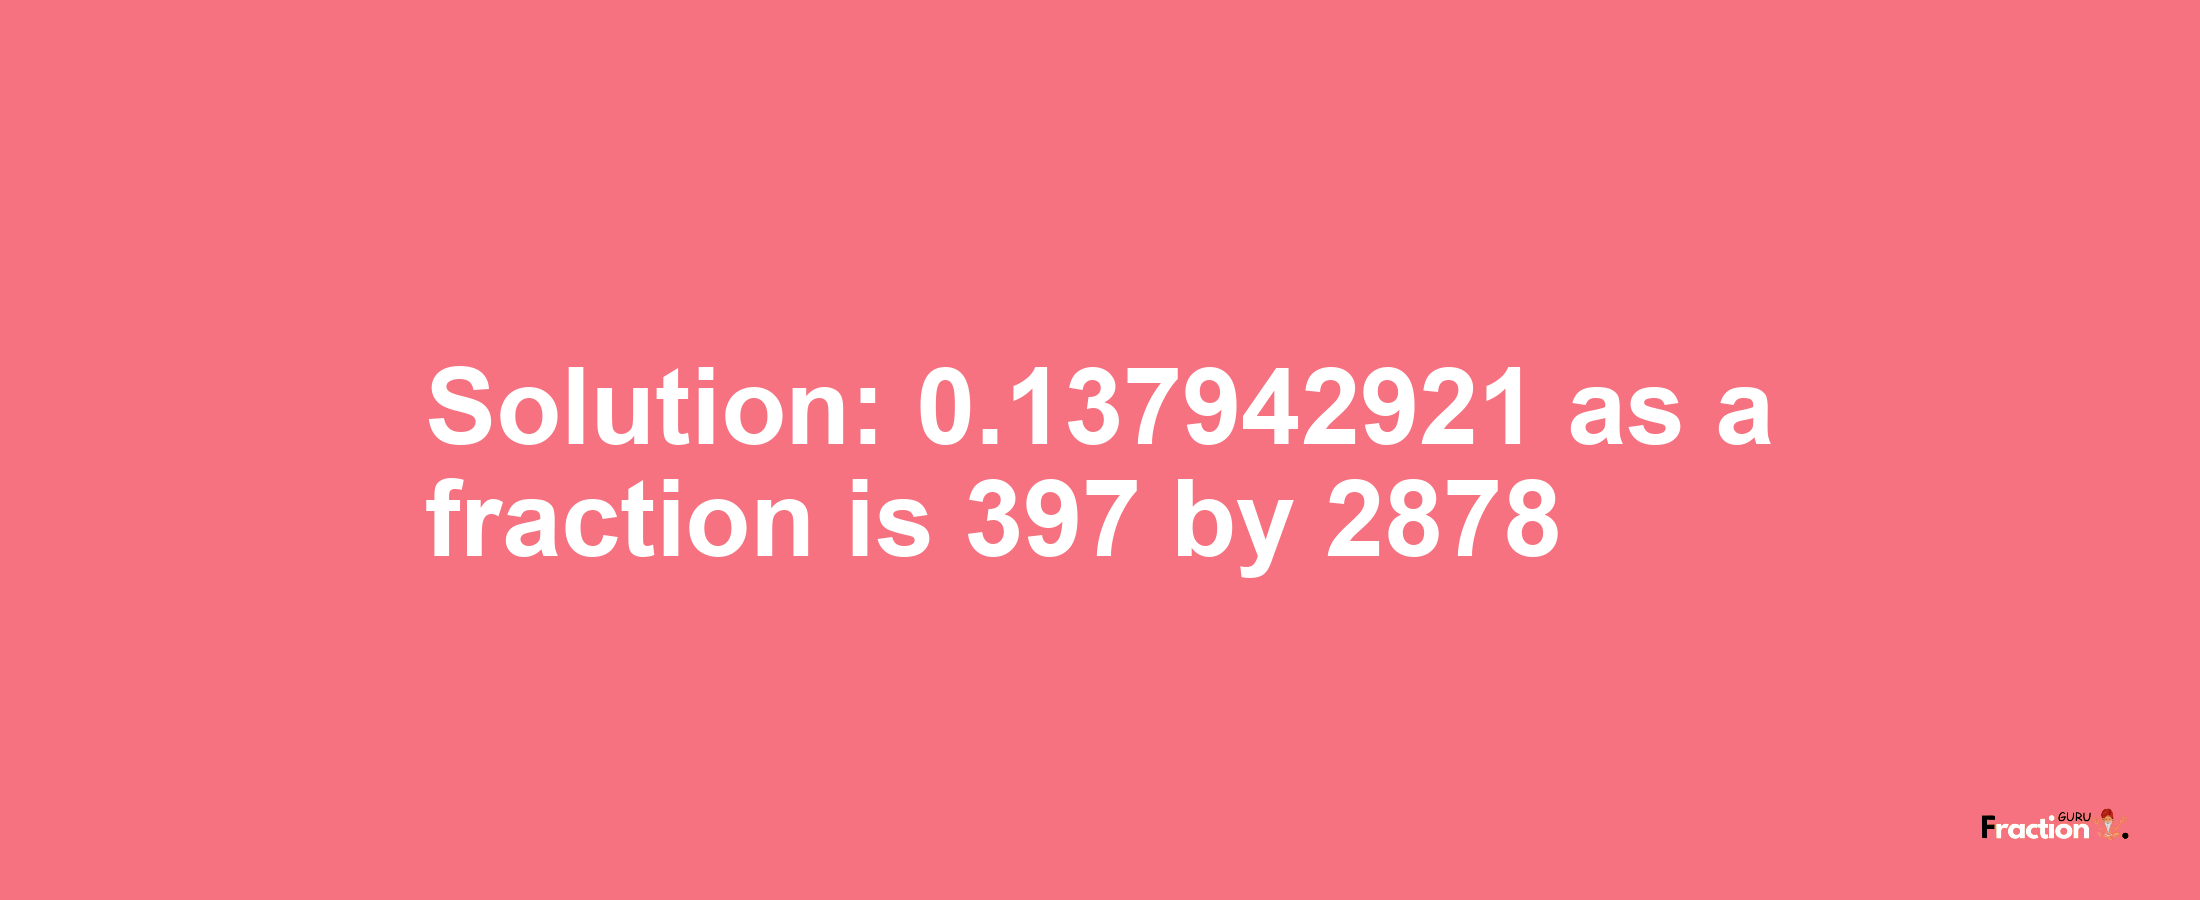 Solution:0.137942921 as a fraction is 397/2878